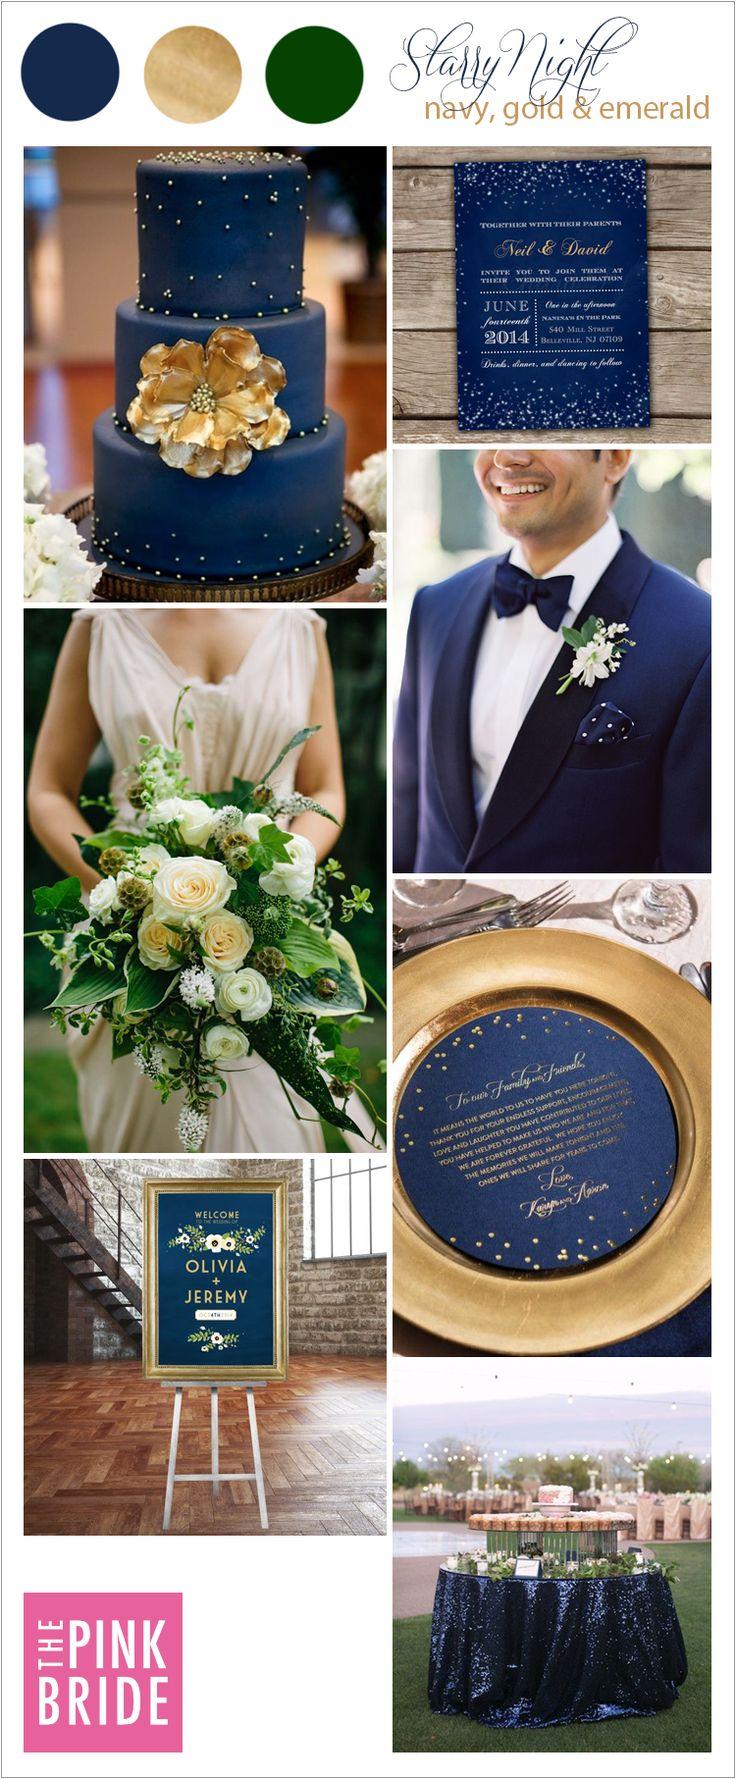 Mariage - Wedding Color Board: Starry Night Navy, Gold & Emerald